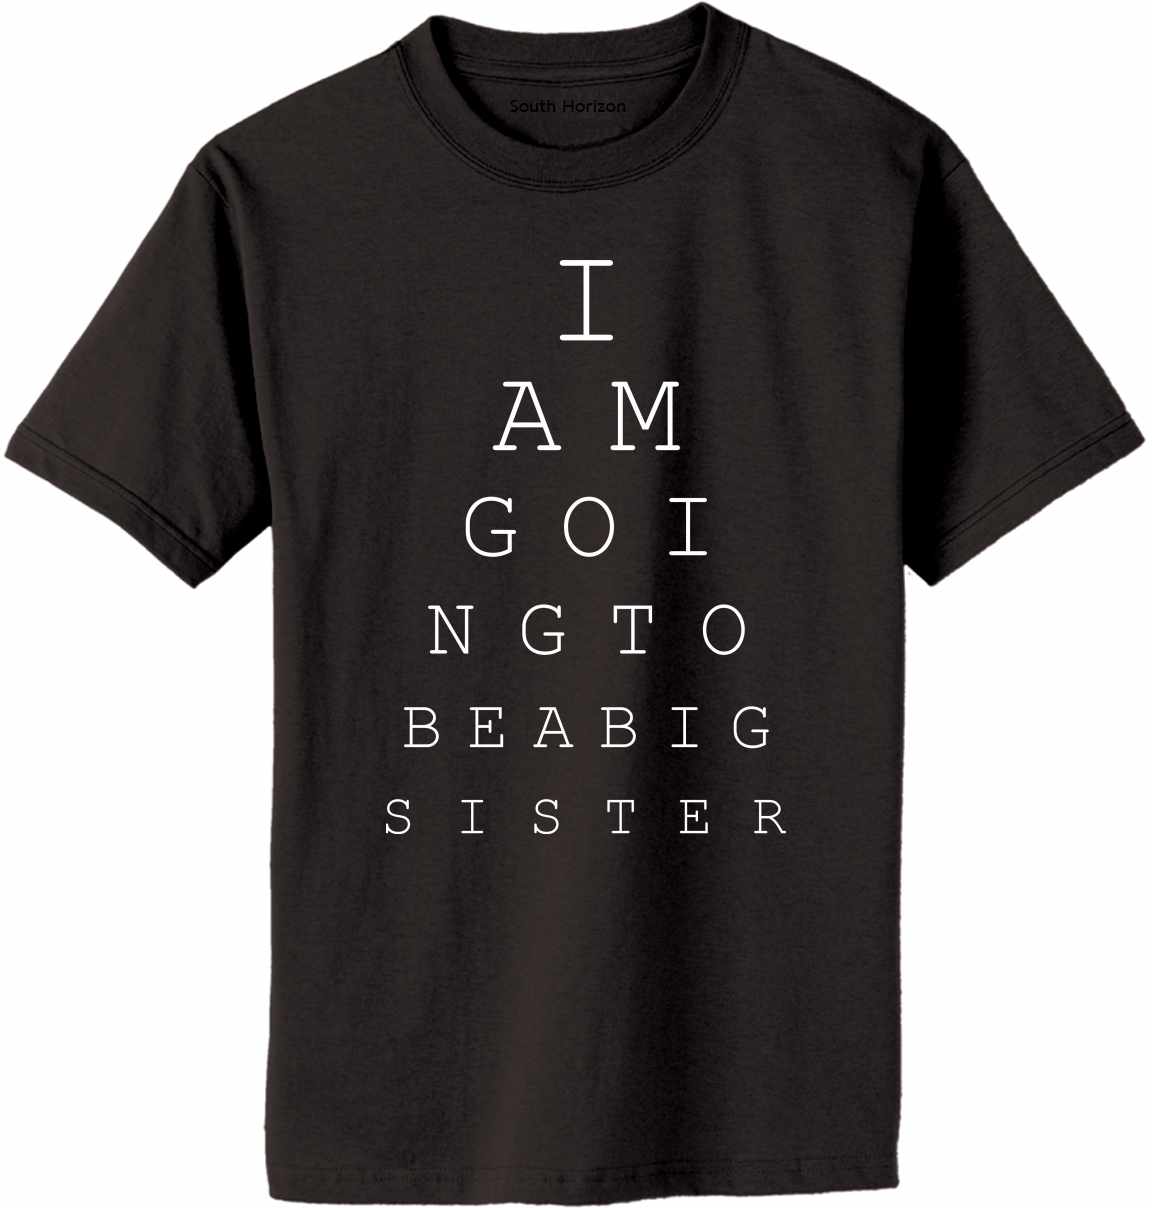 I AM GOING TO BE A BIG SISTER EYE CHART on Adult T-Shirt (#1160-1)